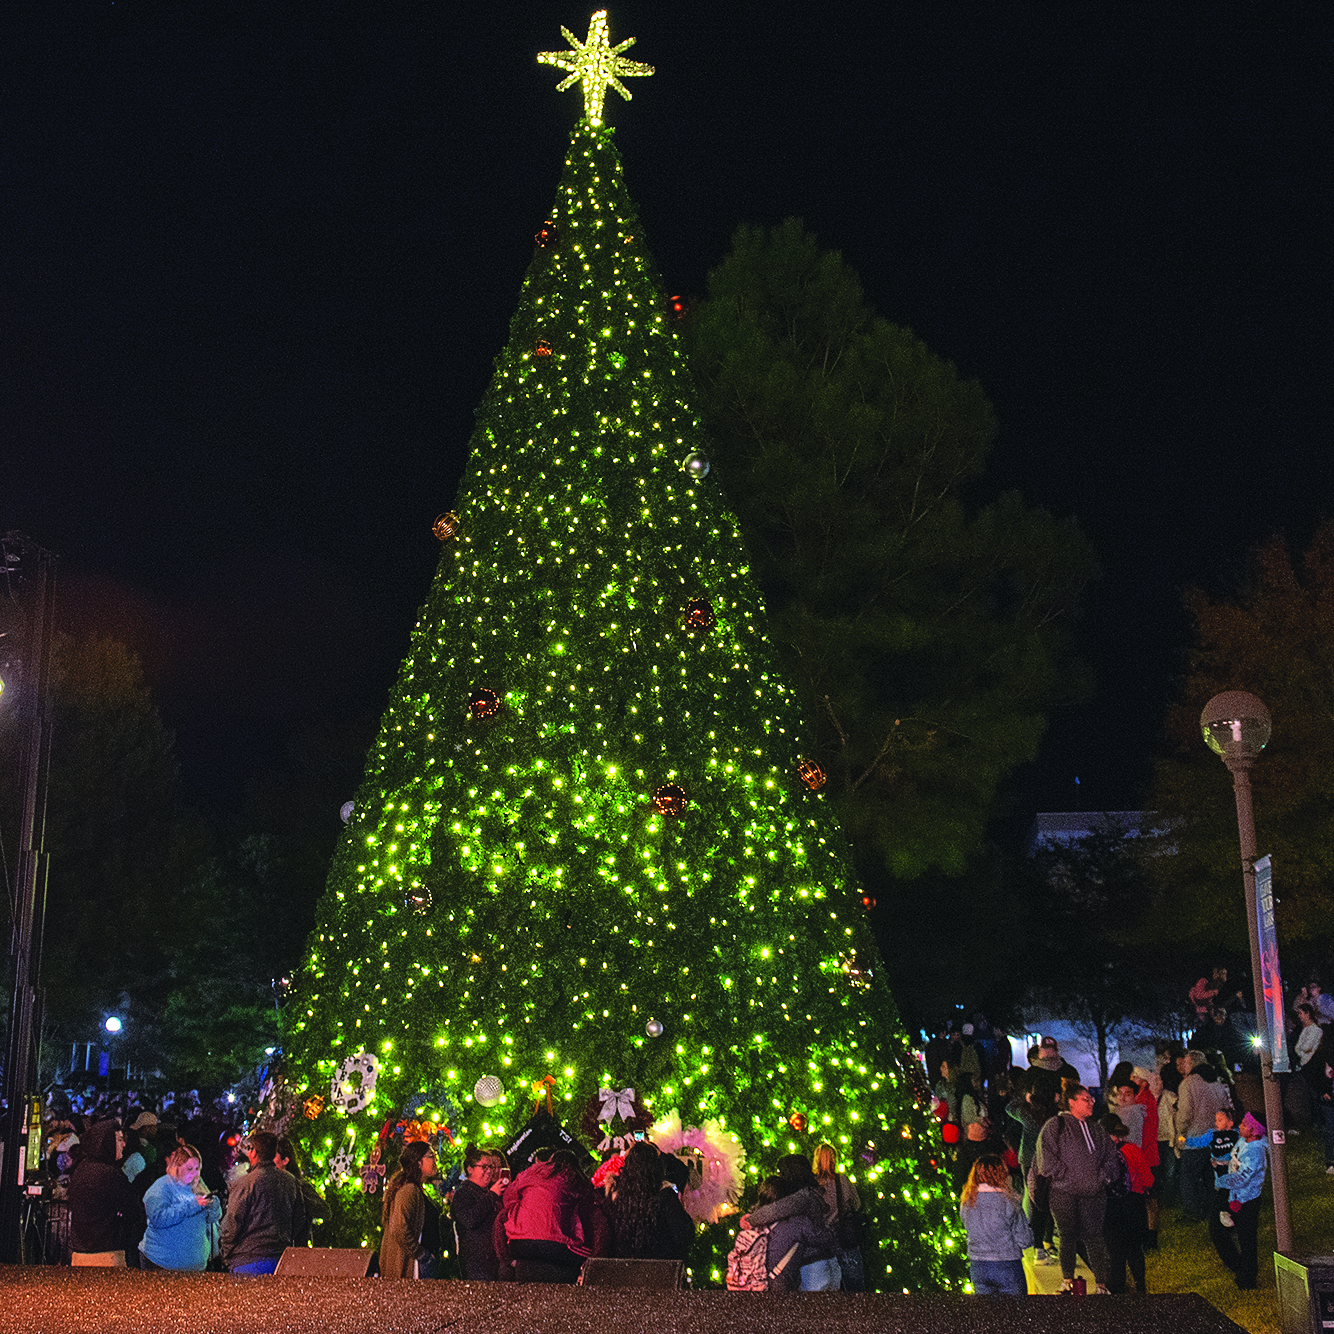 Tree of Light with Crowd Surrounding